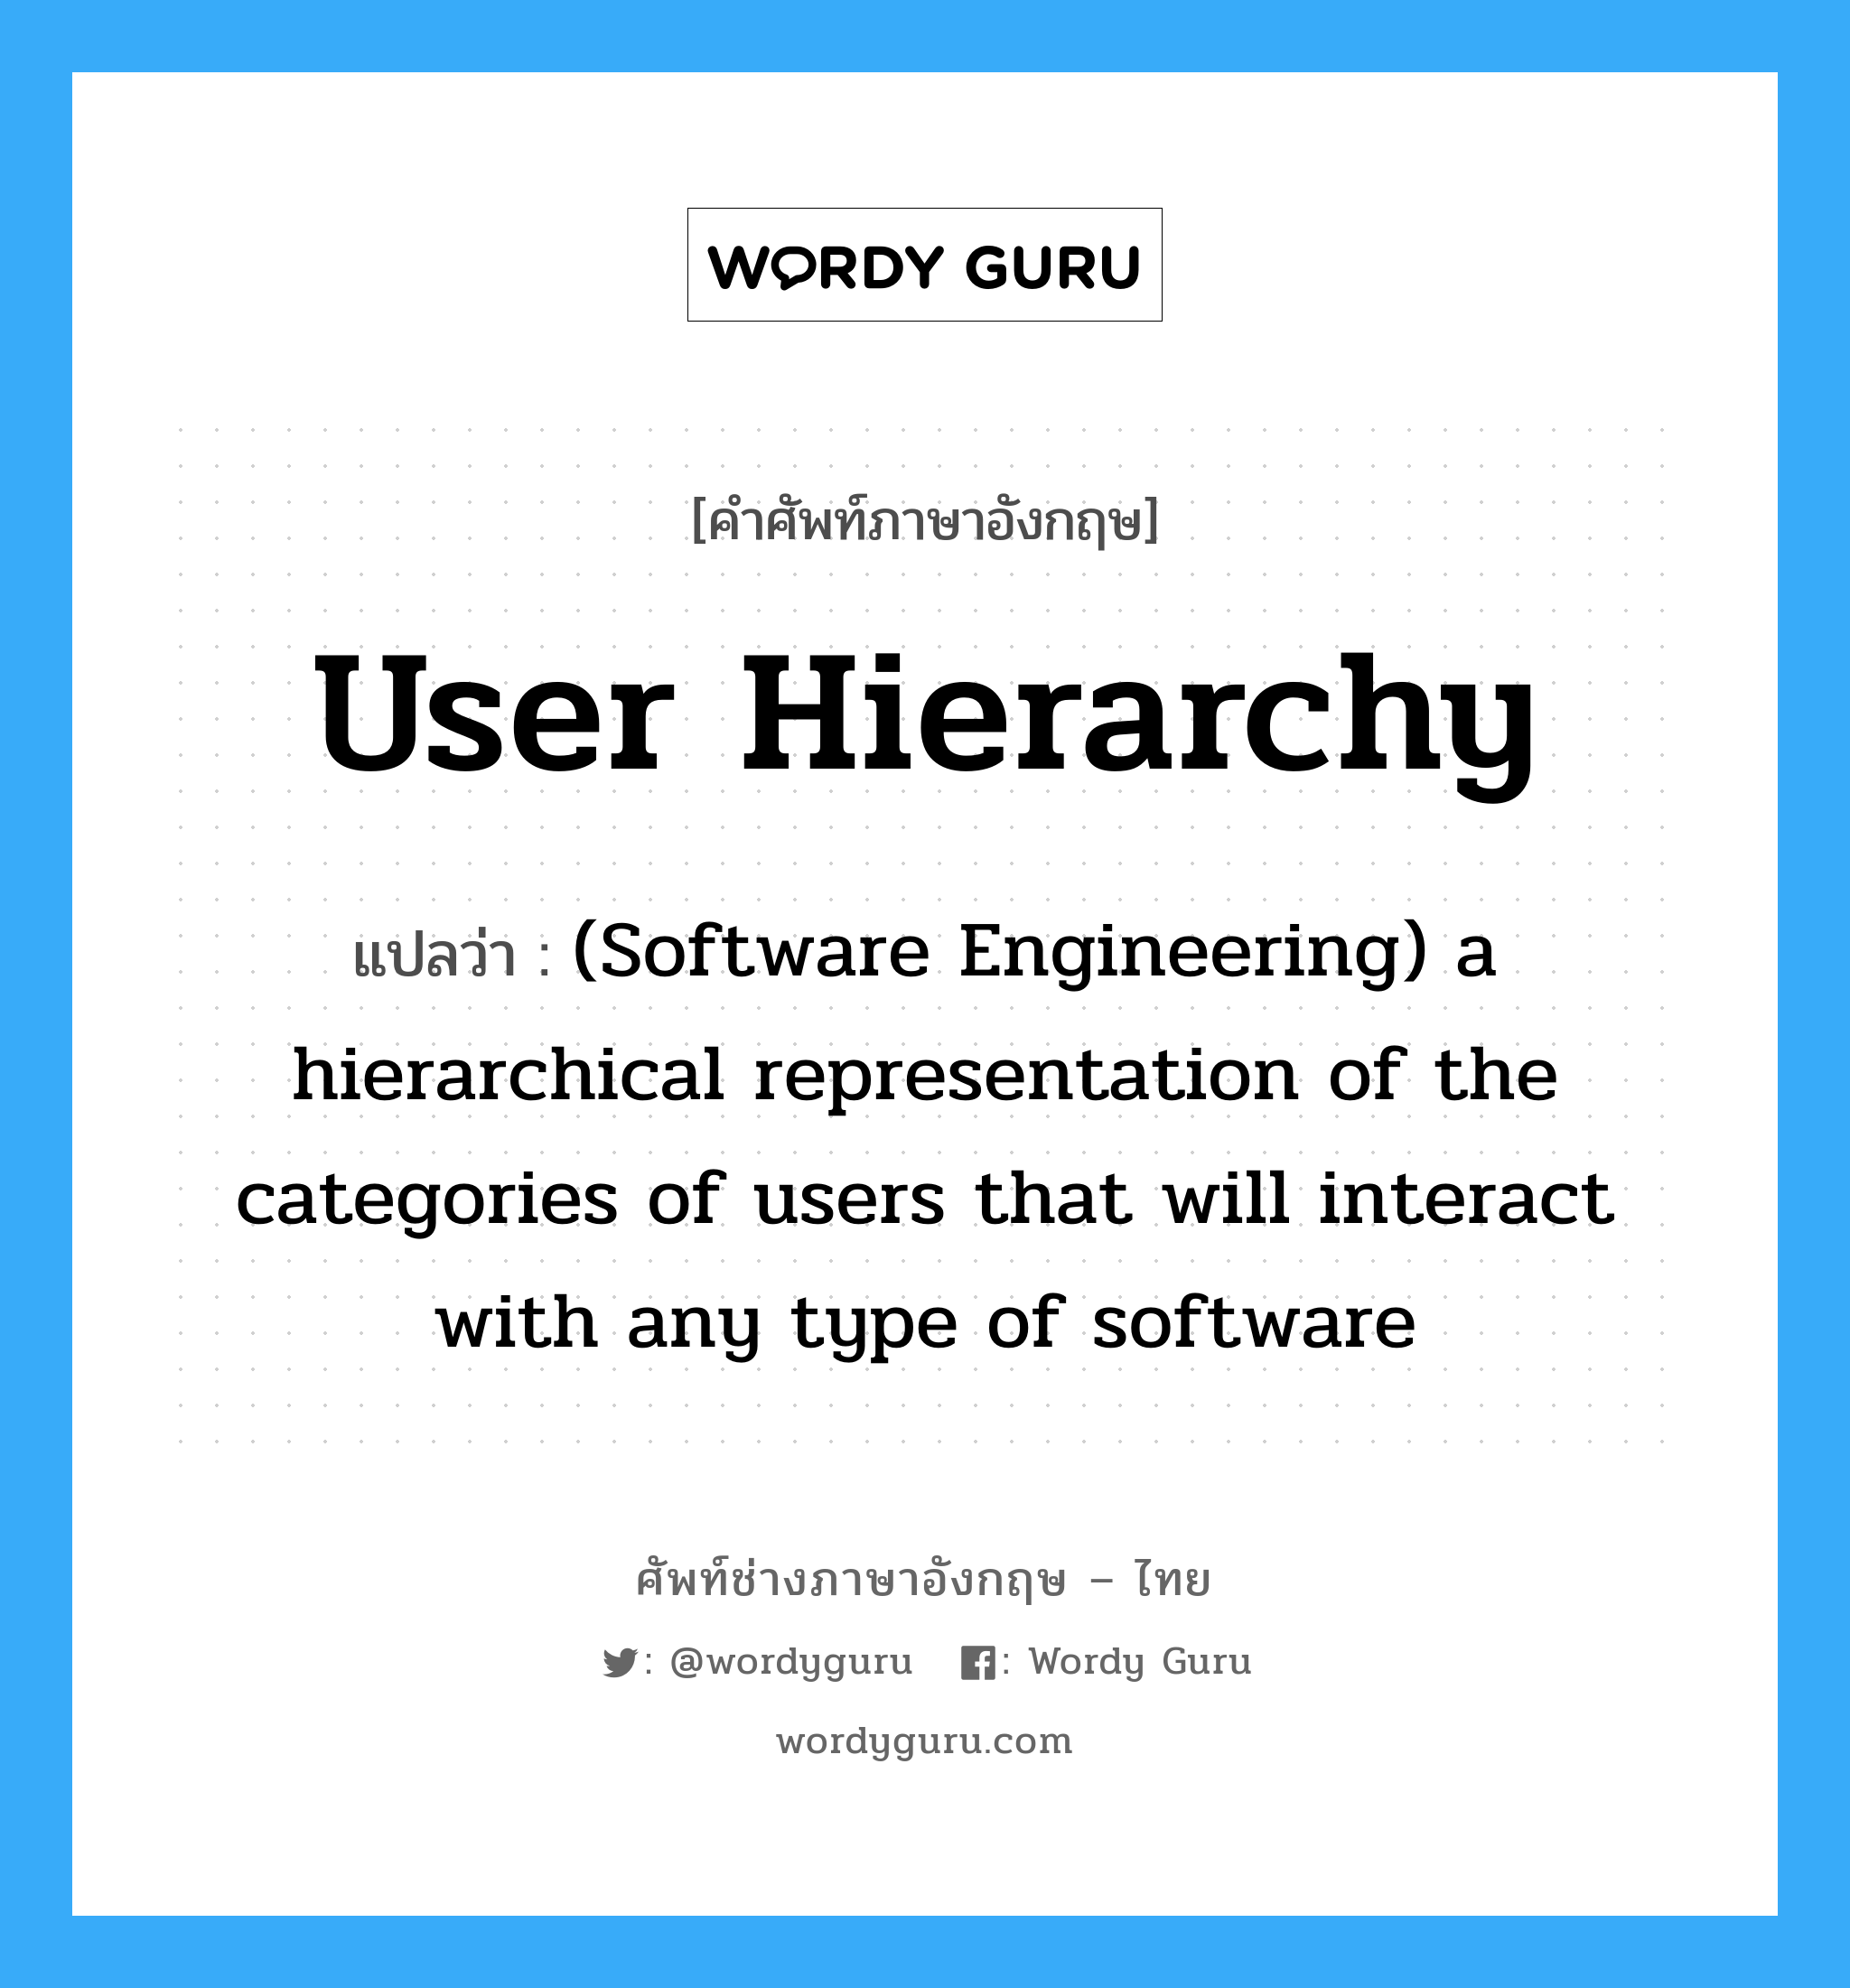 User hierarchy แปลว่า?, คำศัพท์ช่างภาษาอังกฤษ - ไทย User hierarchy คำศัพท์ภาษาอังกฤษ User hierarchy แปลว่า (Software Engineering) a hierarchical representation of the categories of users that will interact with any type of software